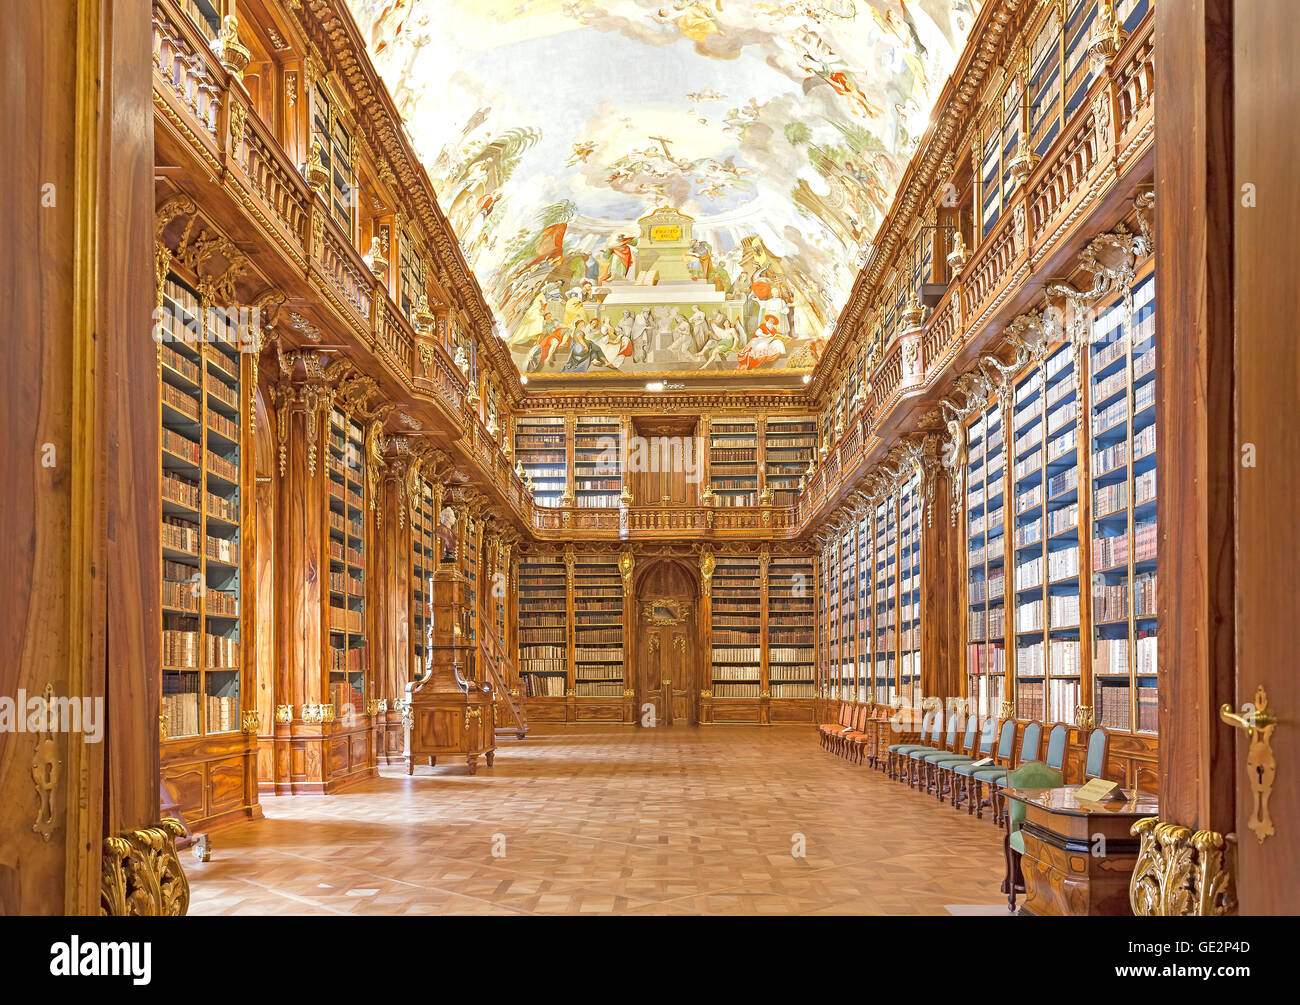 Prague, Czech Republic- June 15, 2014: Library in Strahov monastery in Prague, one of the finest library interiors in Europe. Stock Photo